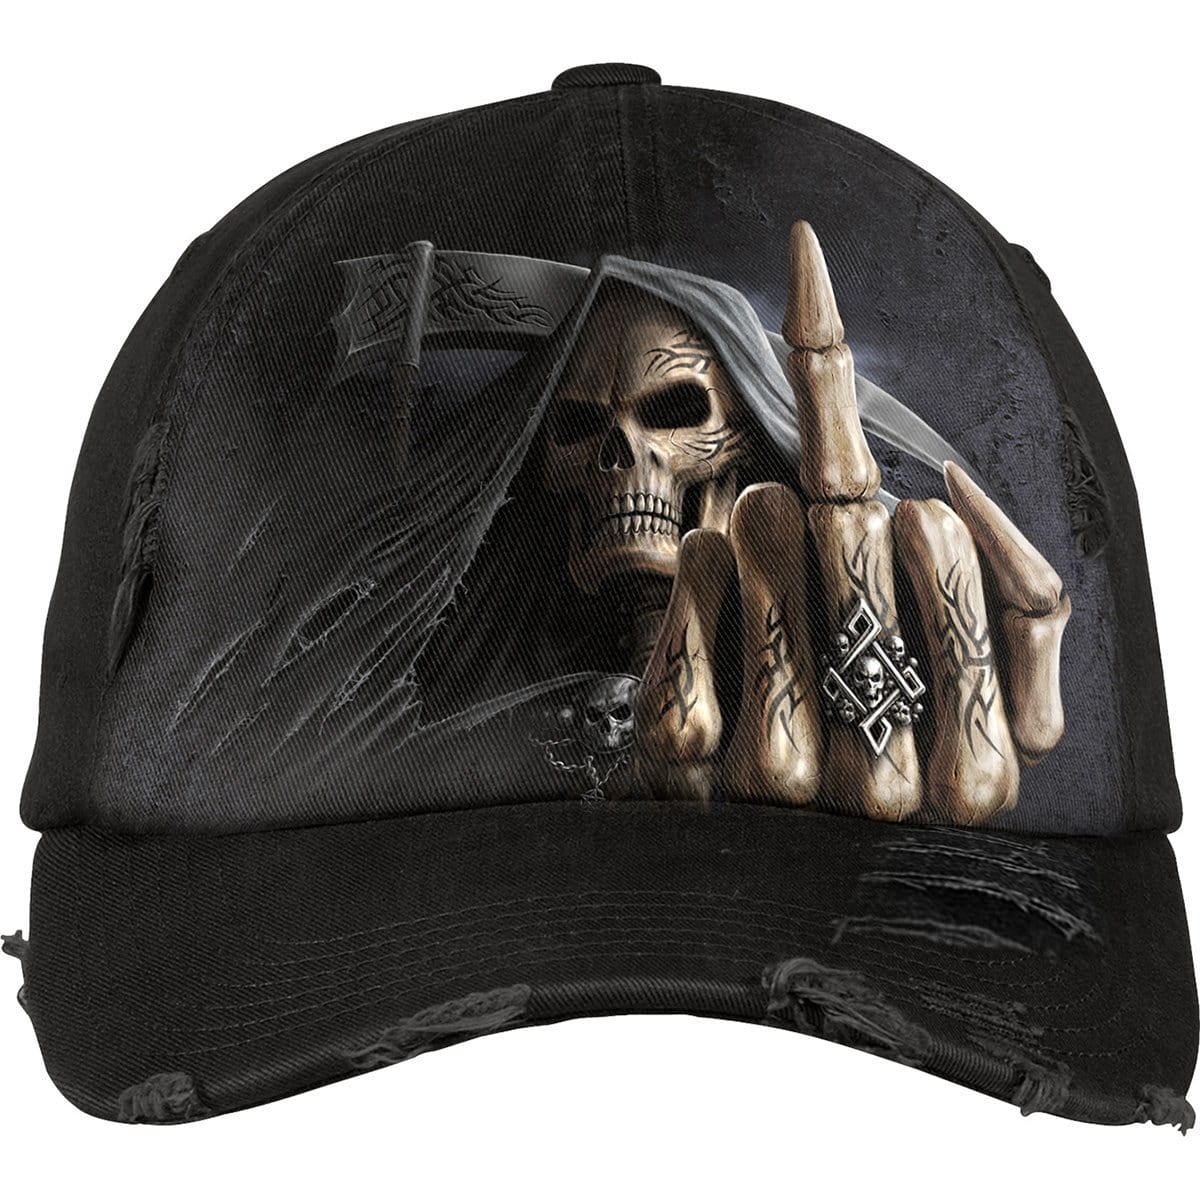 BONE FINGER - Baseball Caps Distressed with Metal Clasp - Spiral USA